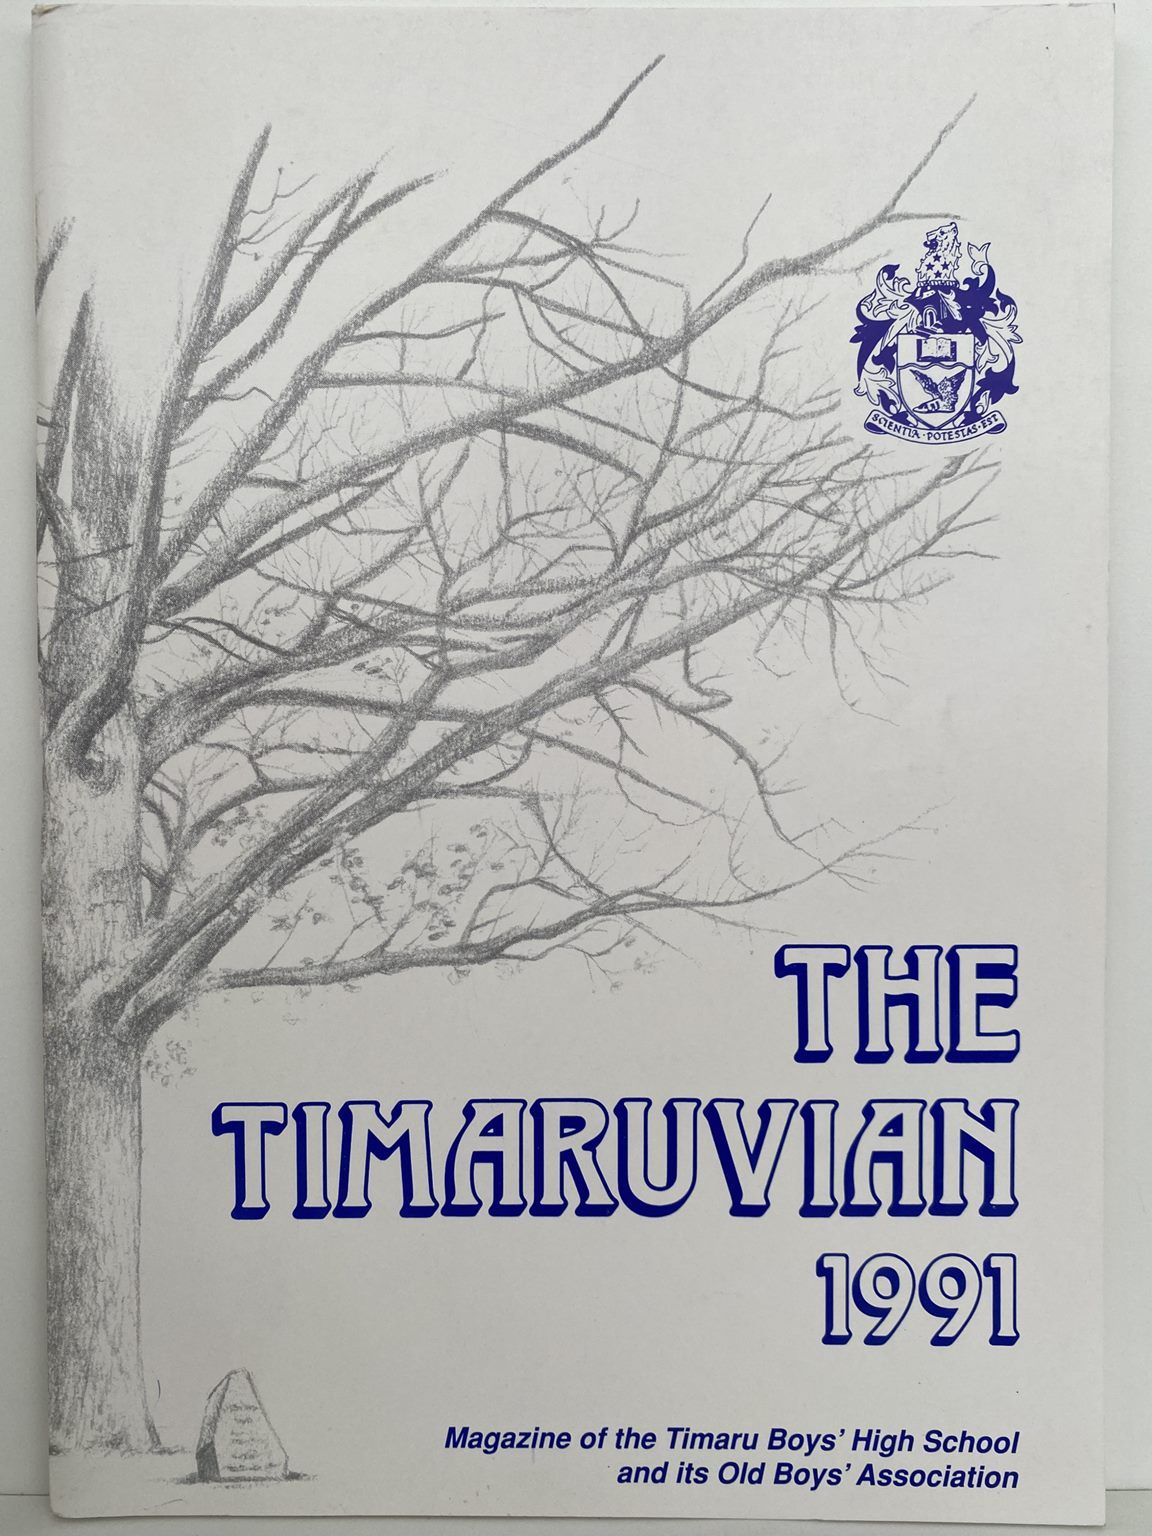 THE TIMARUVIAN: Magazine of the Timaru Boys' High School and its Old Boys' Association 1991